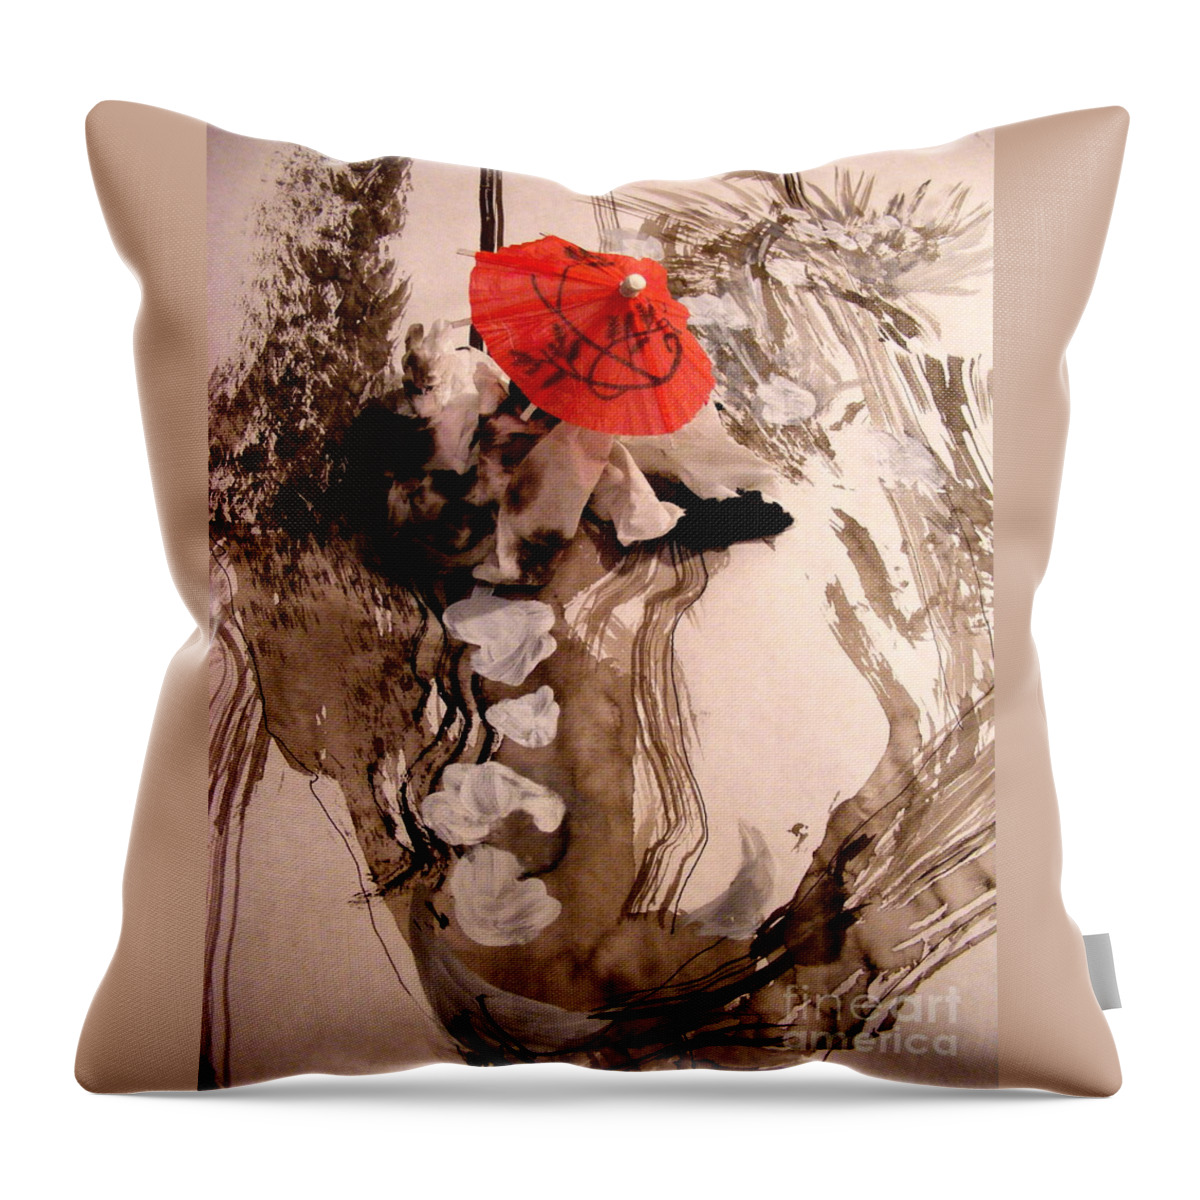 Mixed Media Throw Pillow featuring the mixed media In the Winter Garden by Nancy Kane Chapman